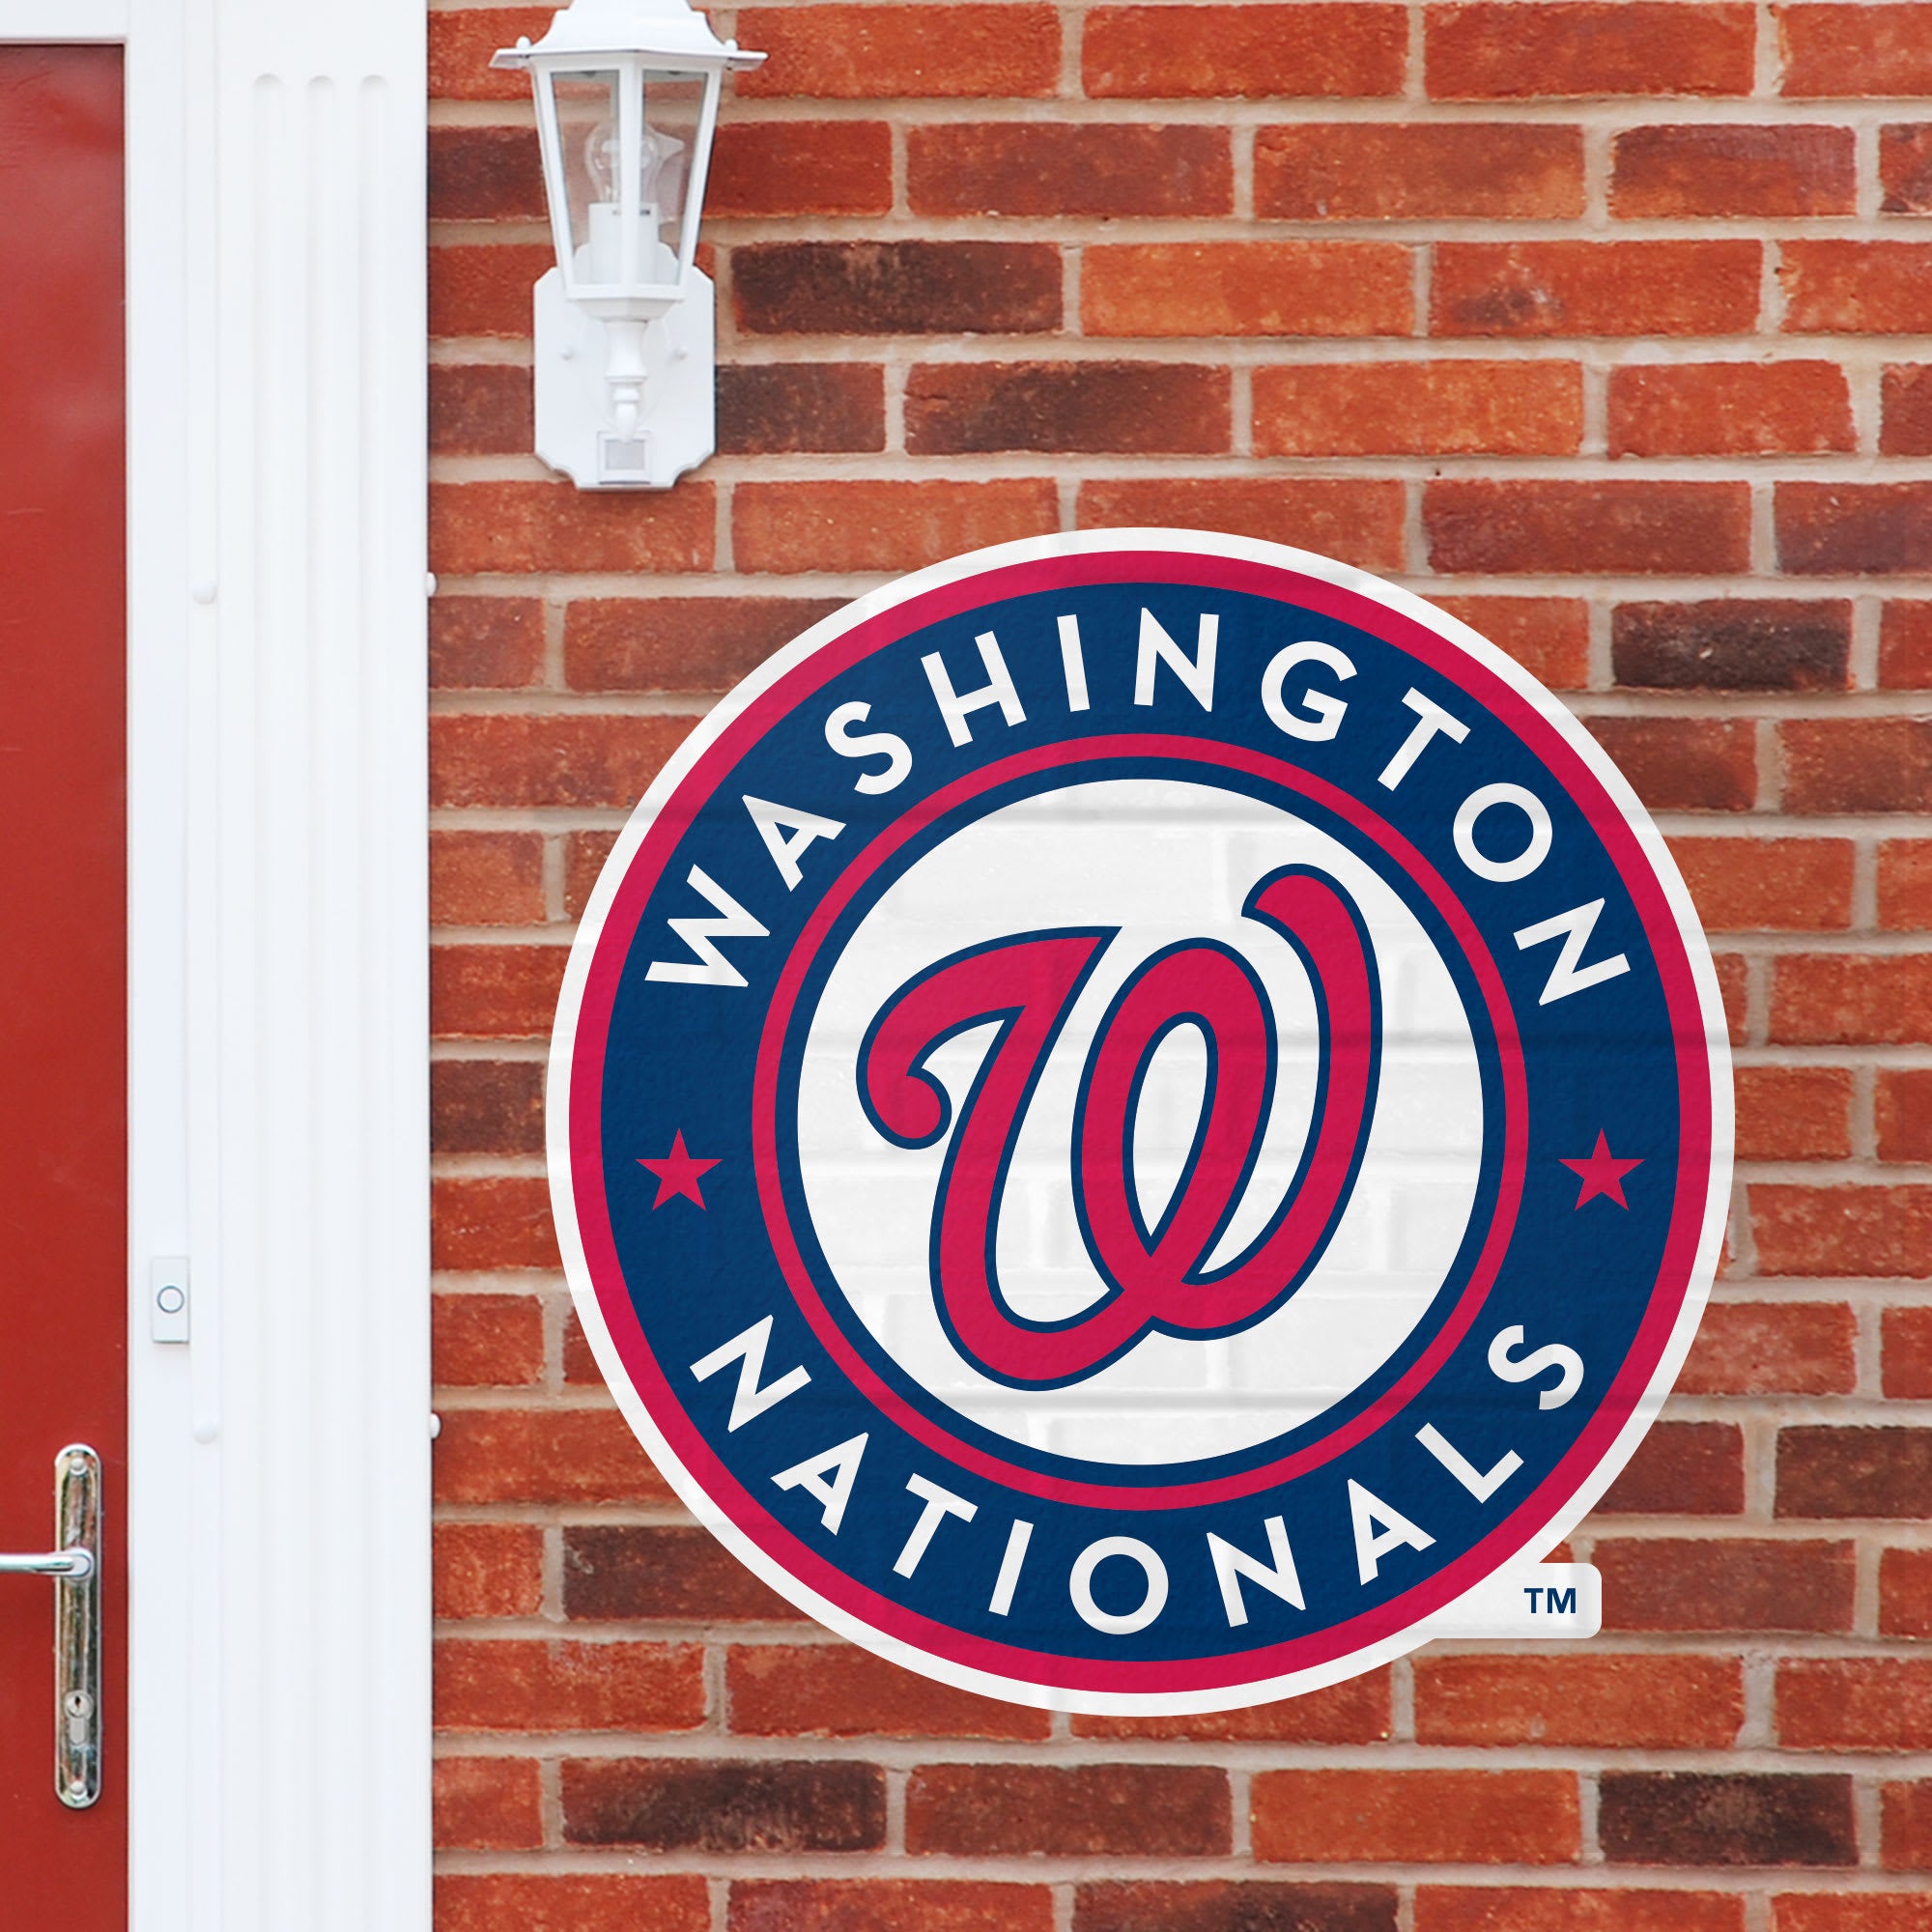 Washington Nationals: Logo - Officially Licensed MLB Outdoor Graphic Giant Logo (30"W x 30"H) by Fathead | Wood/Aluminum